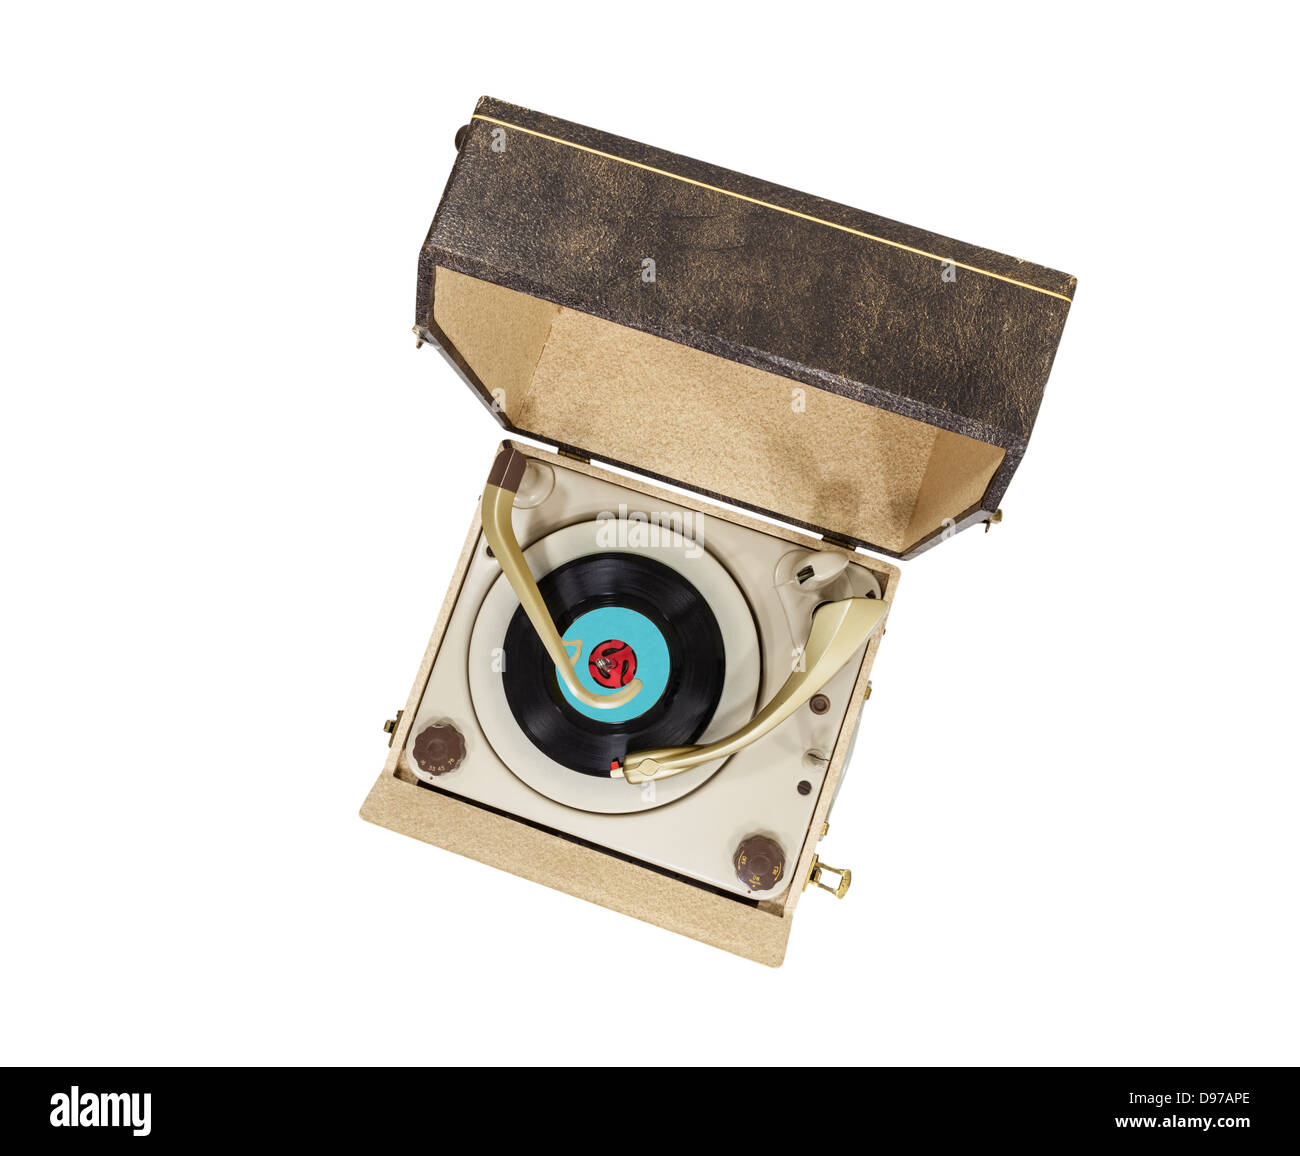 Vintage turntable record player box isolated with clipping path. Stock Photo